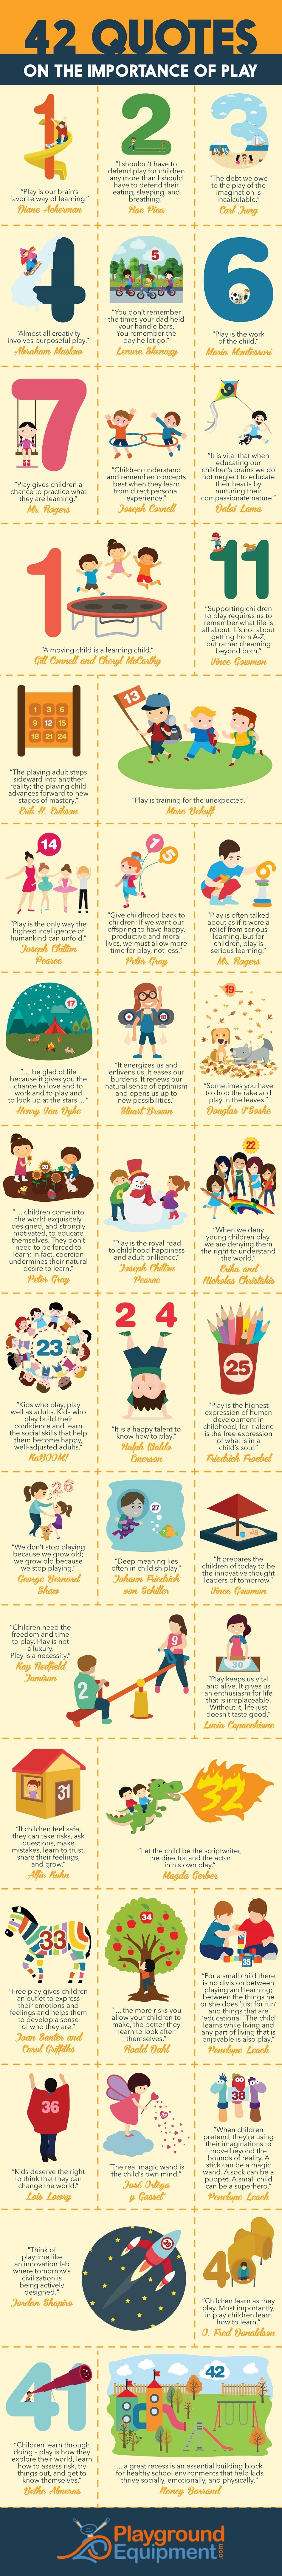 42 Quotes on the Importance of Play Infographic